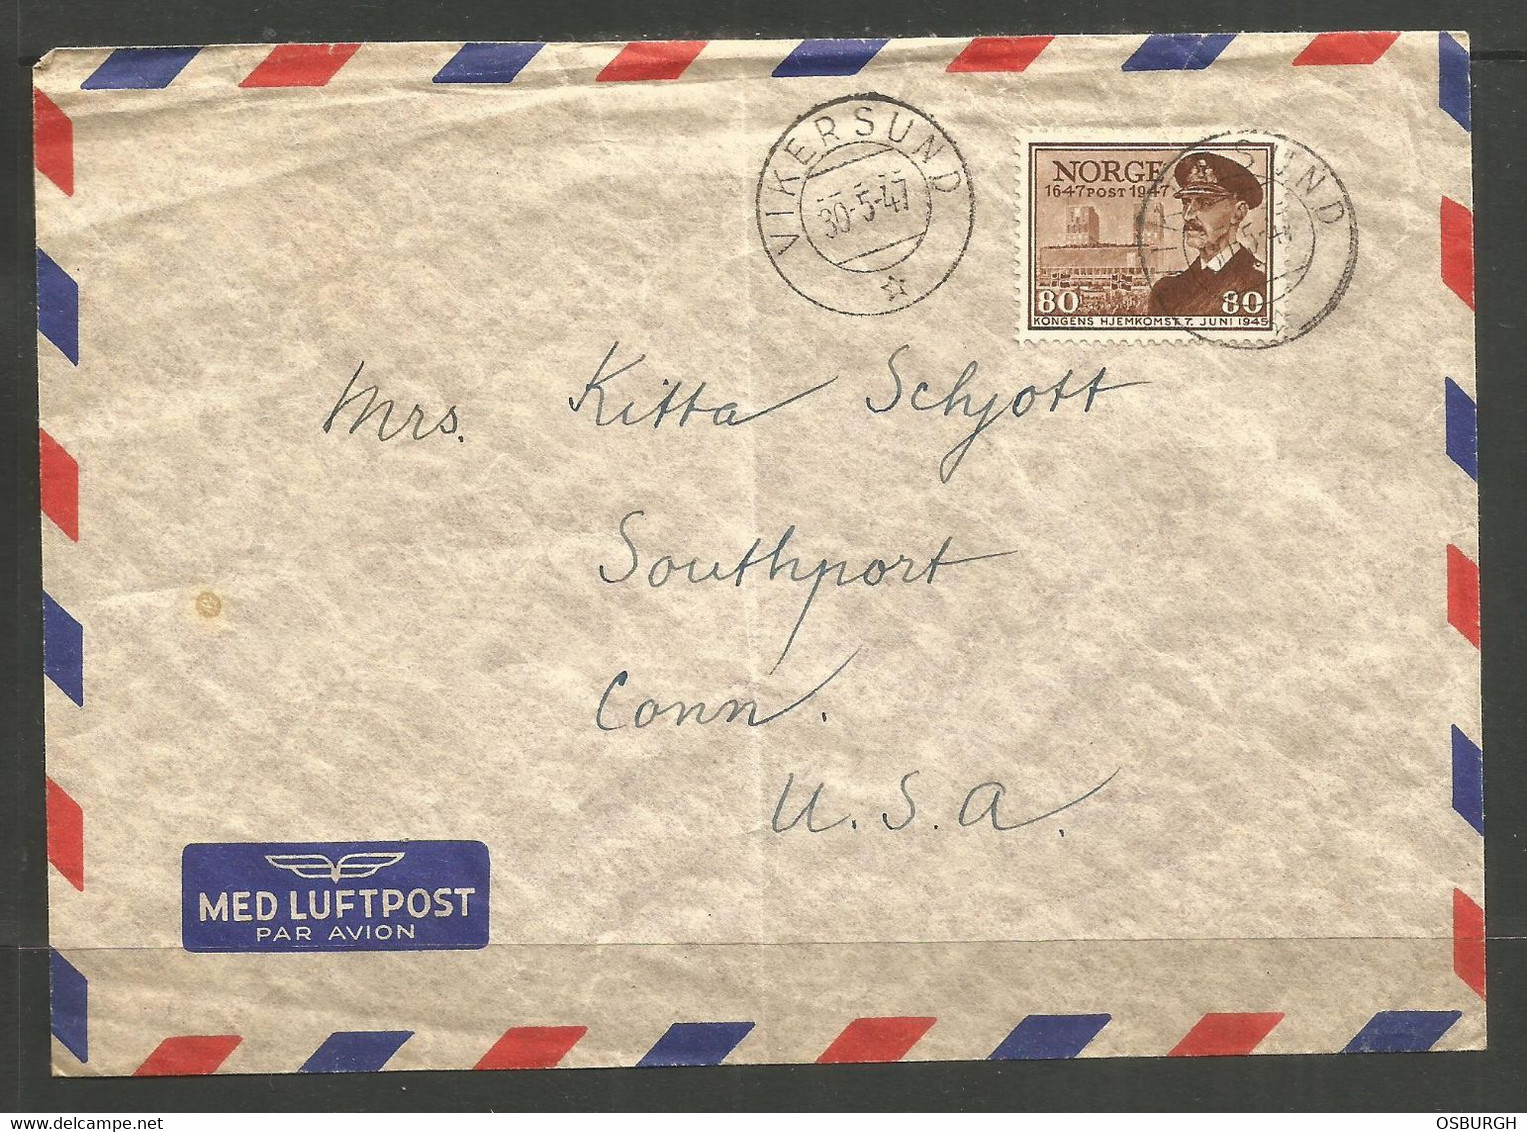 NORWAY. 1947. AIR MAIL COVER. VIKERSUND TO SOUTHPORT CONNECTICUT - Brieven En Documenten